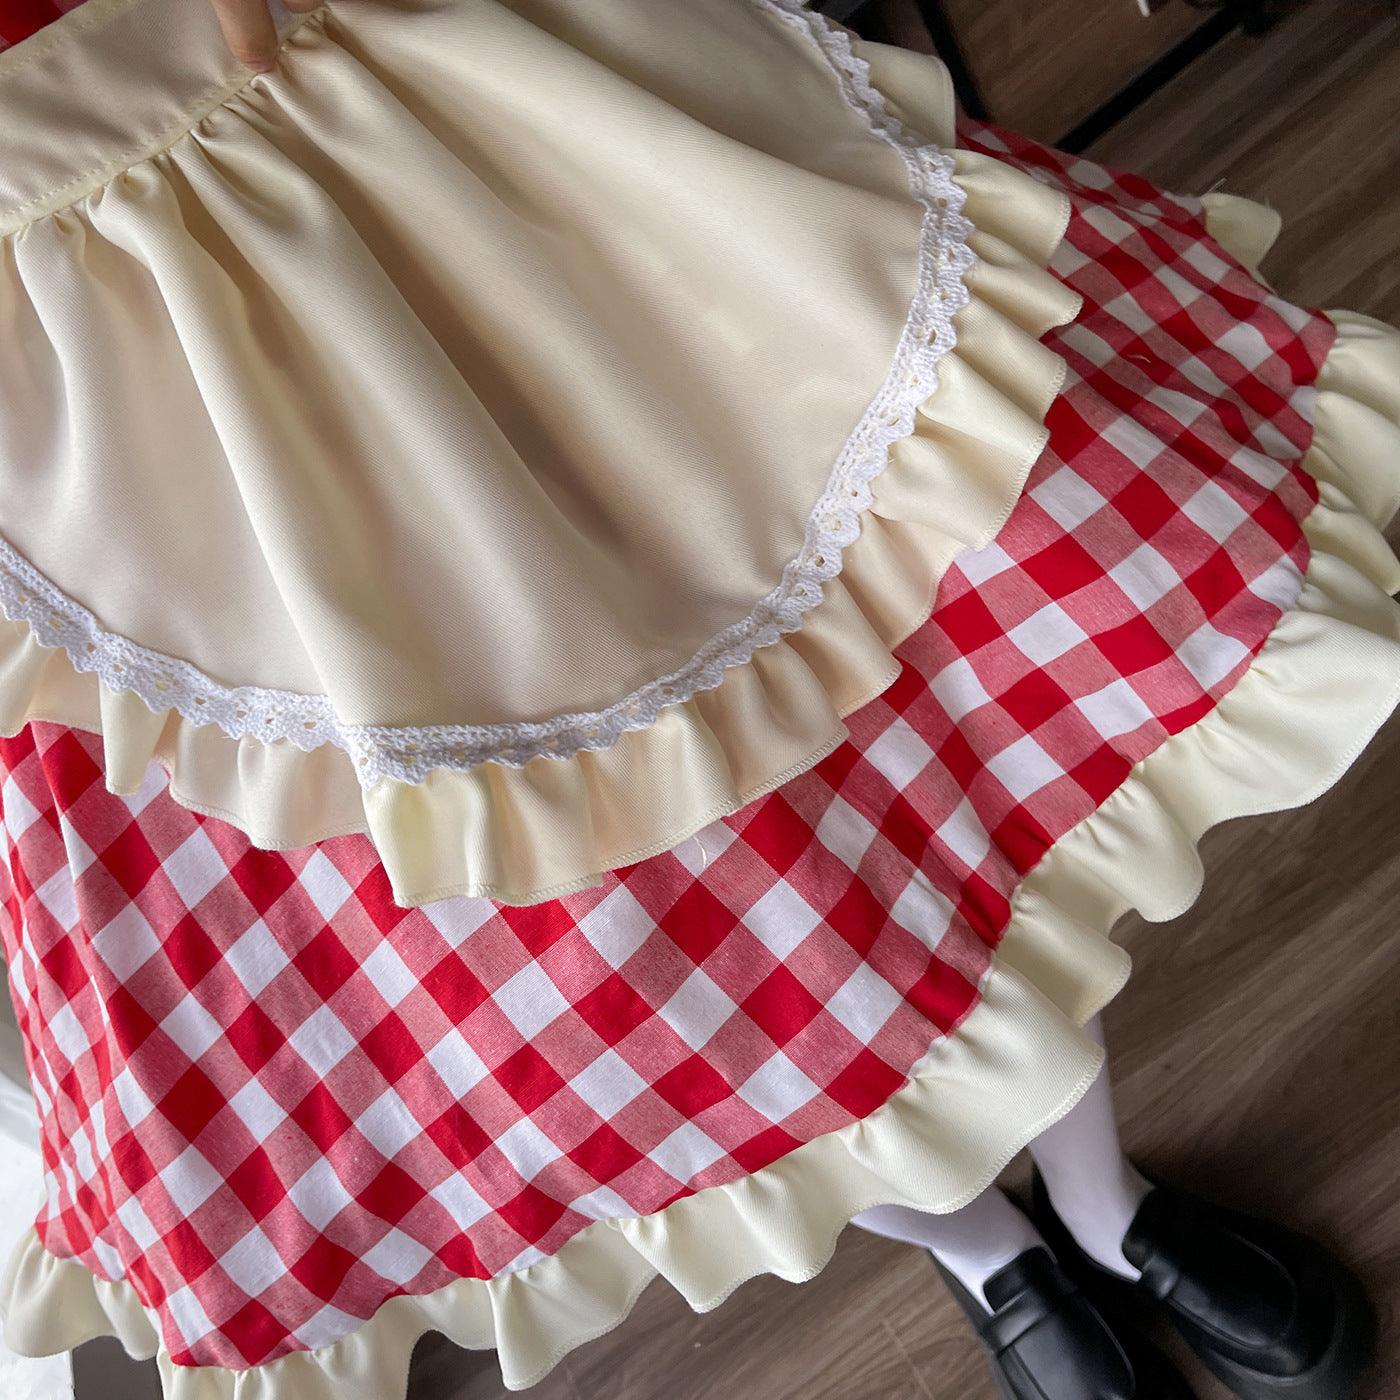 Black Red Grid Large Size Maid Outfit Lolita Dress Crossdresser Cute Fancy Cosplay Costume